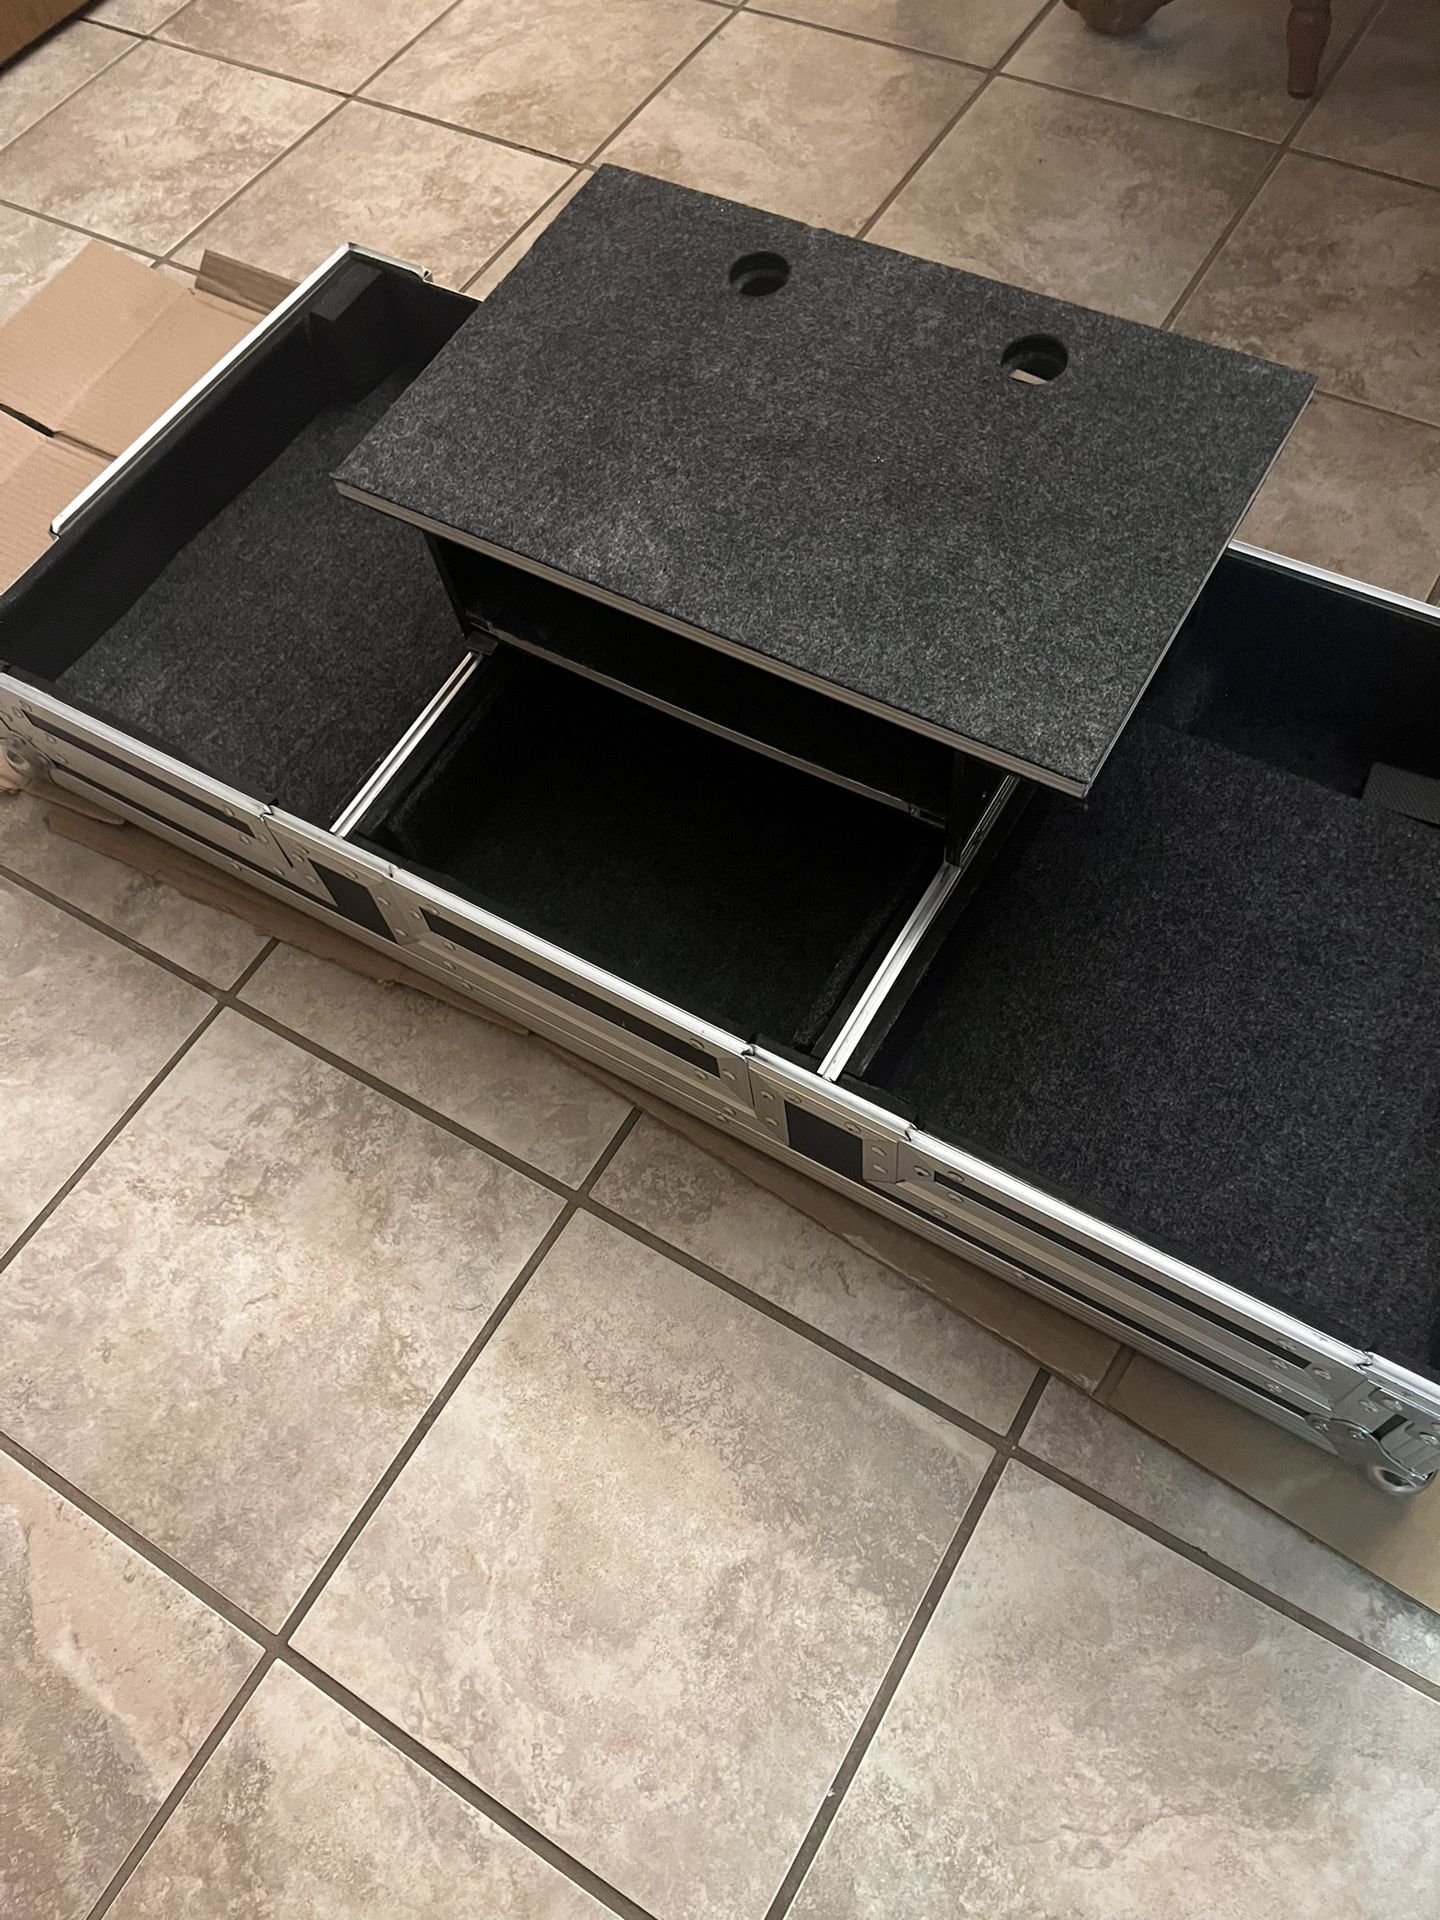 Odyssey Flight Zone Case For 2 CDJs And 12” Mixer/Glide Laptop Stand